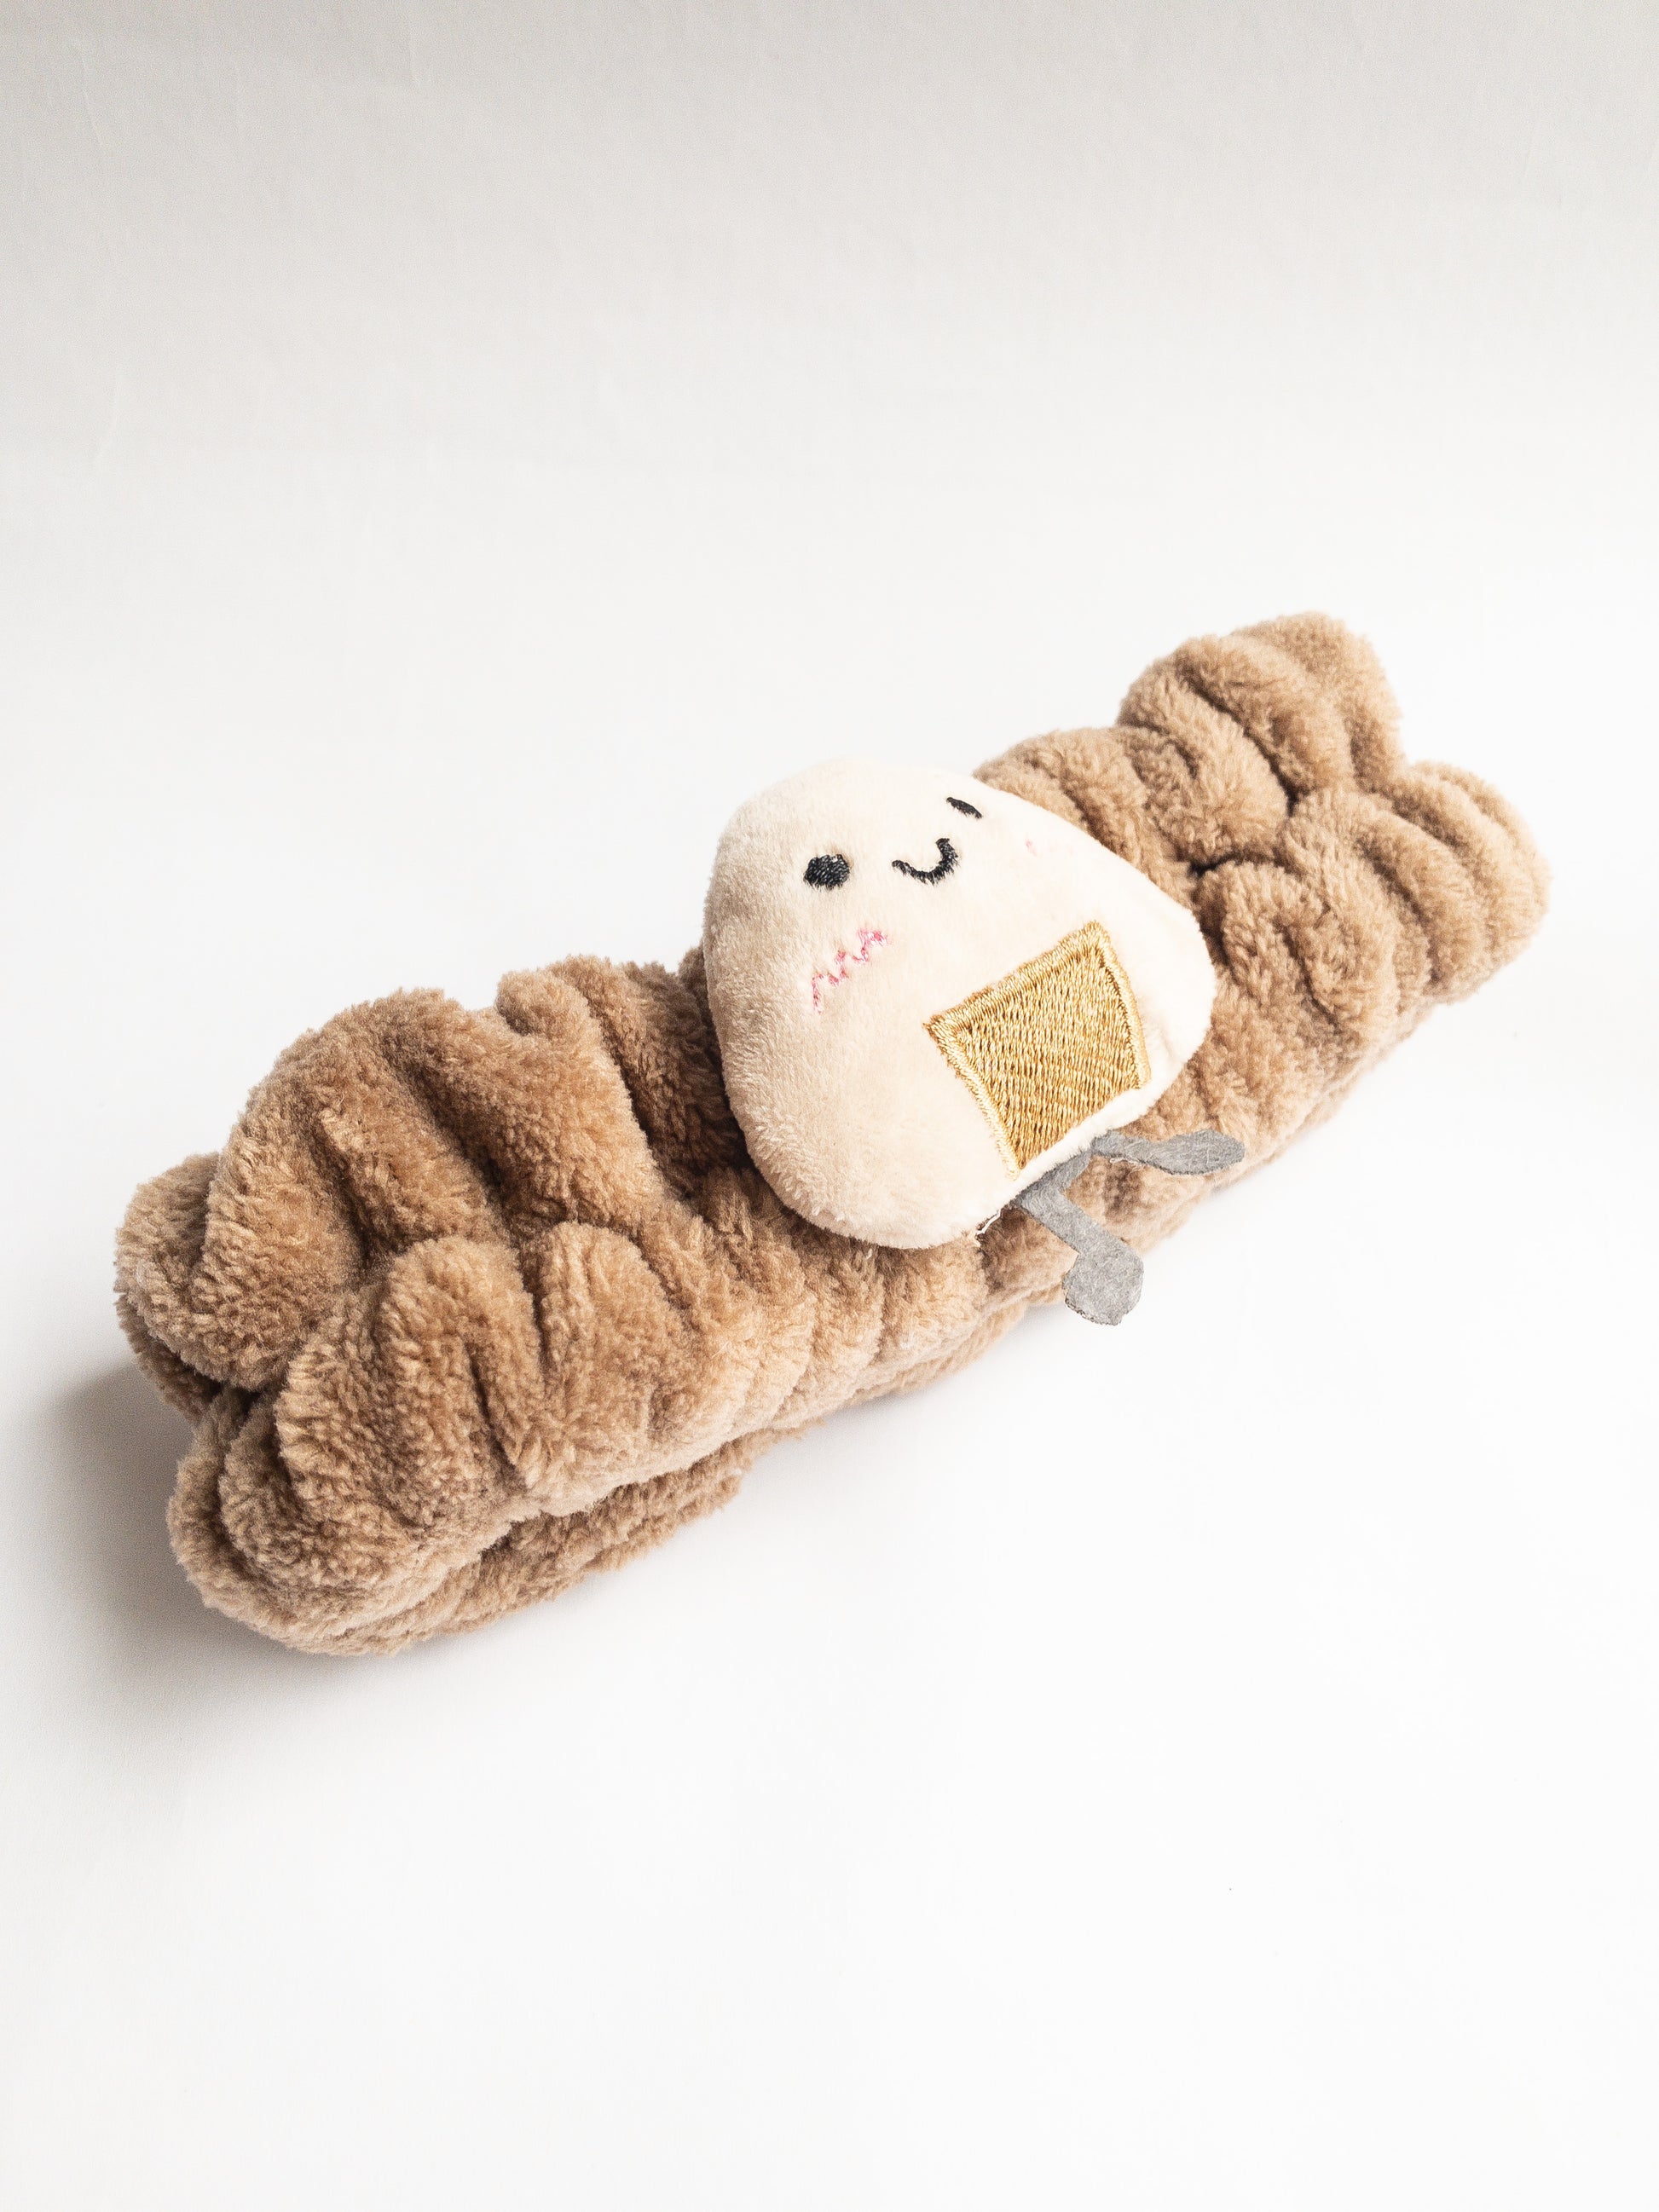 Our adorable onigiri plush spa headband makes the perfect accessory for all your spa days! Each headband is so soft and comfy with a cute rice ball (ju-mok bap in Korean). Pamper yourself in plushy-goodness and sweet, sweet relaxation! Go ahead, you deserve it!